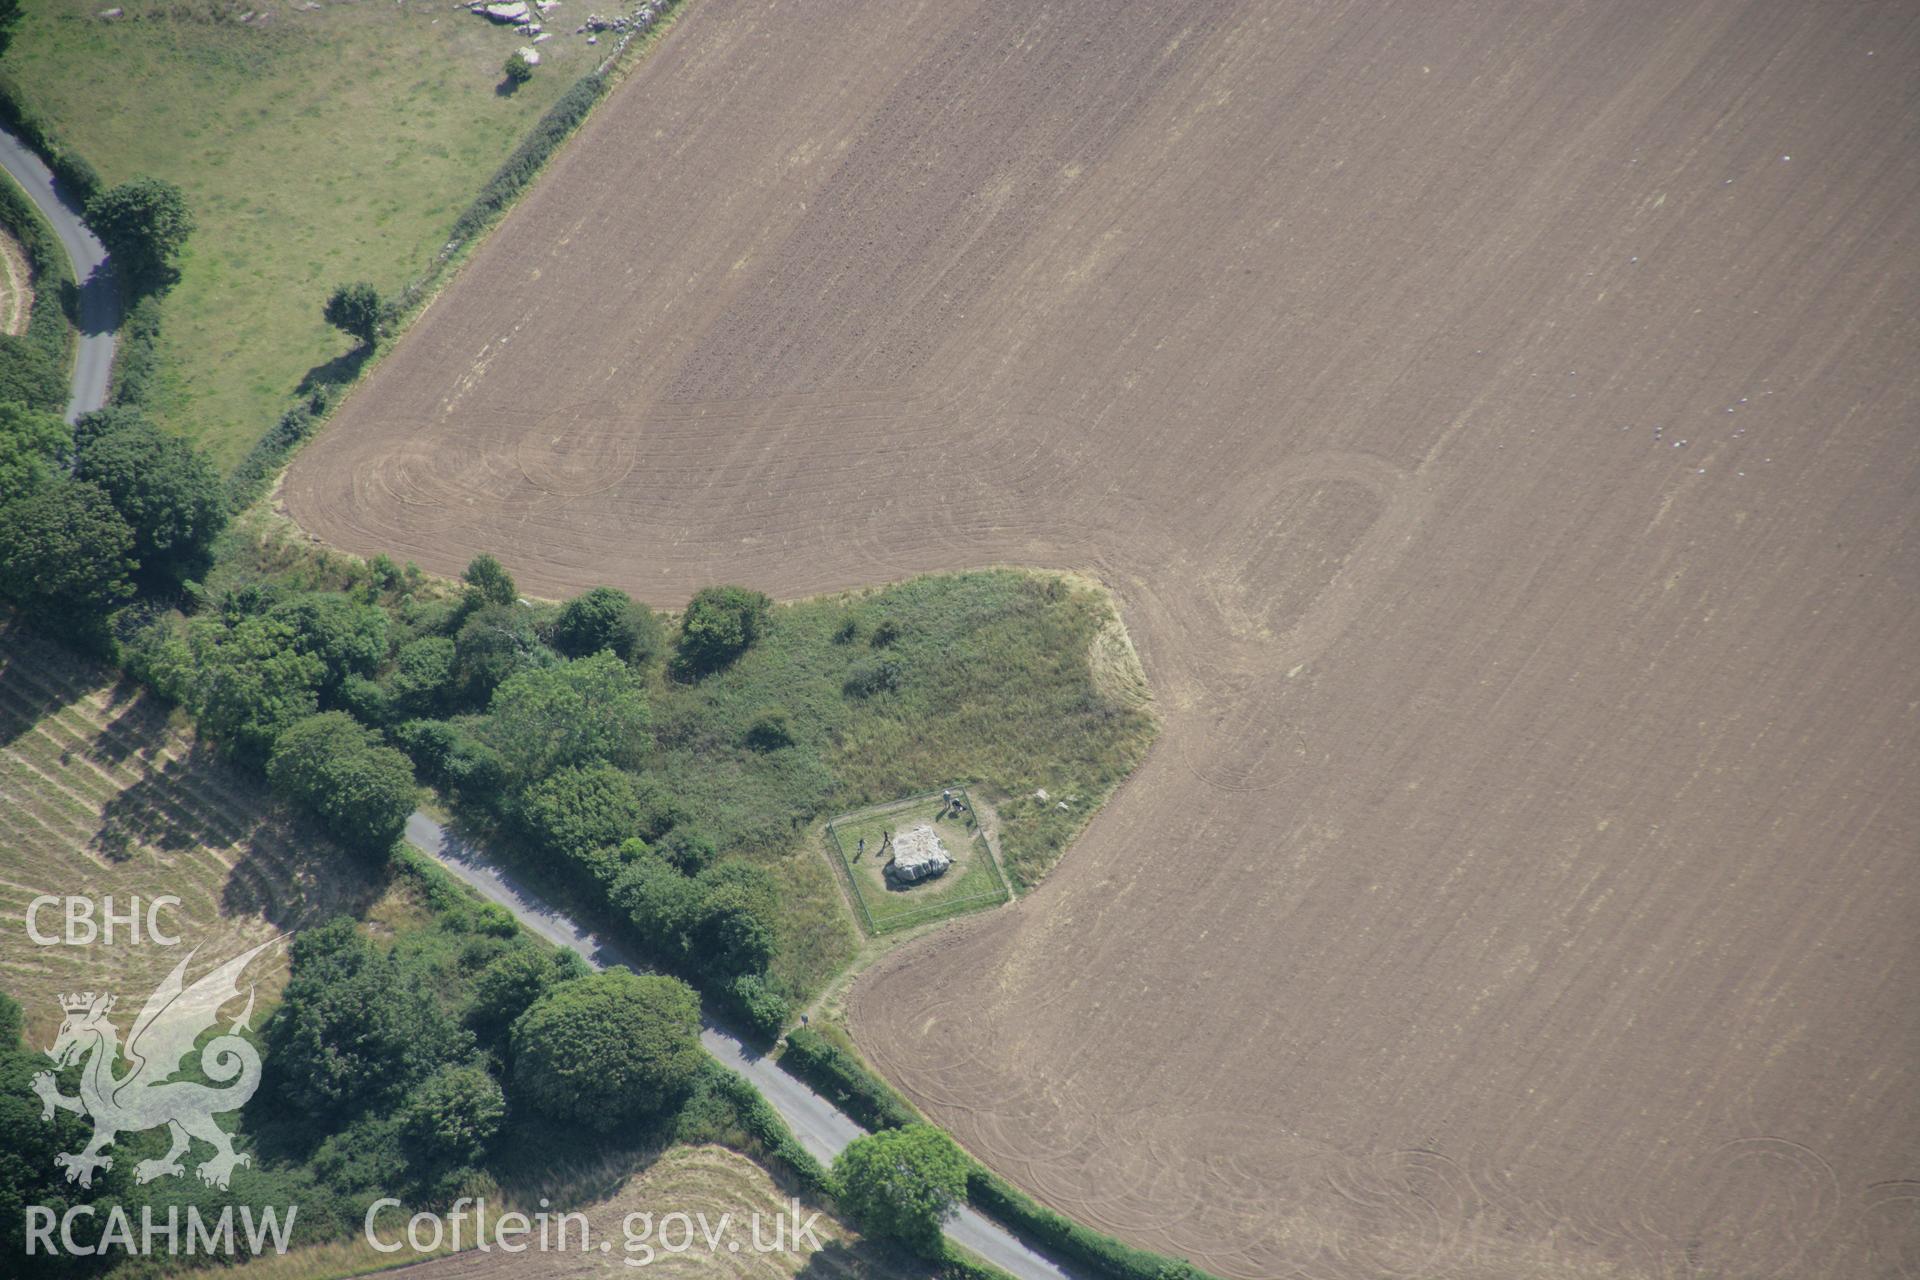 RCAHMW colour oblique aerial photograph of Lligwy Burial Chamber, near Moelfre. Taken on 14 August 2006 by Toby Driver.